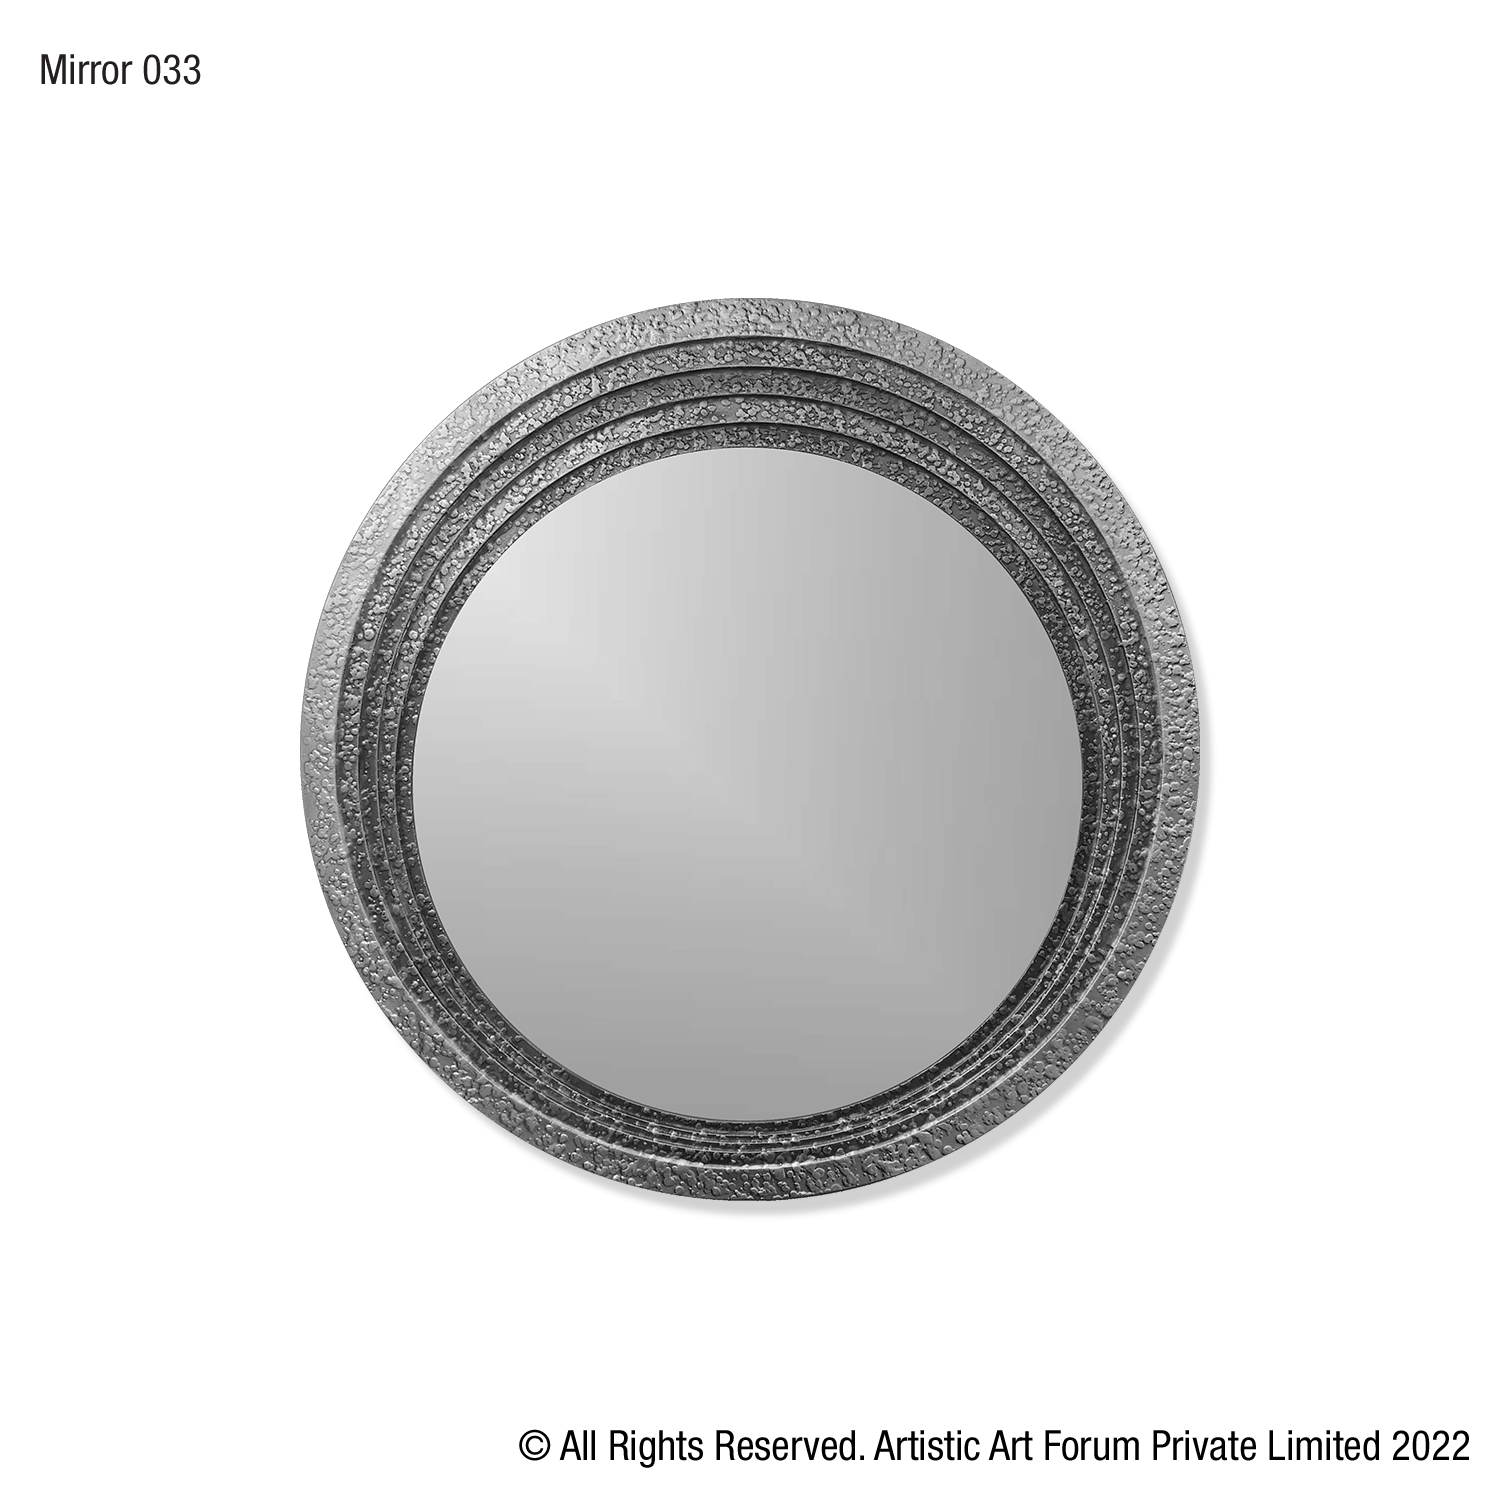 Circular White Metal Anqtique Wall Mirror | For Home Wall Decor